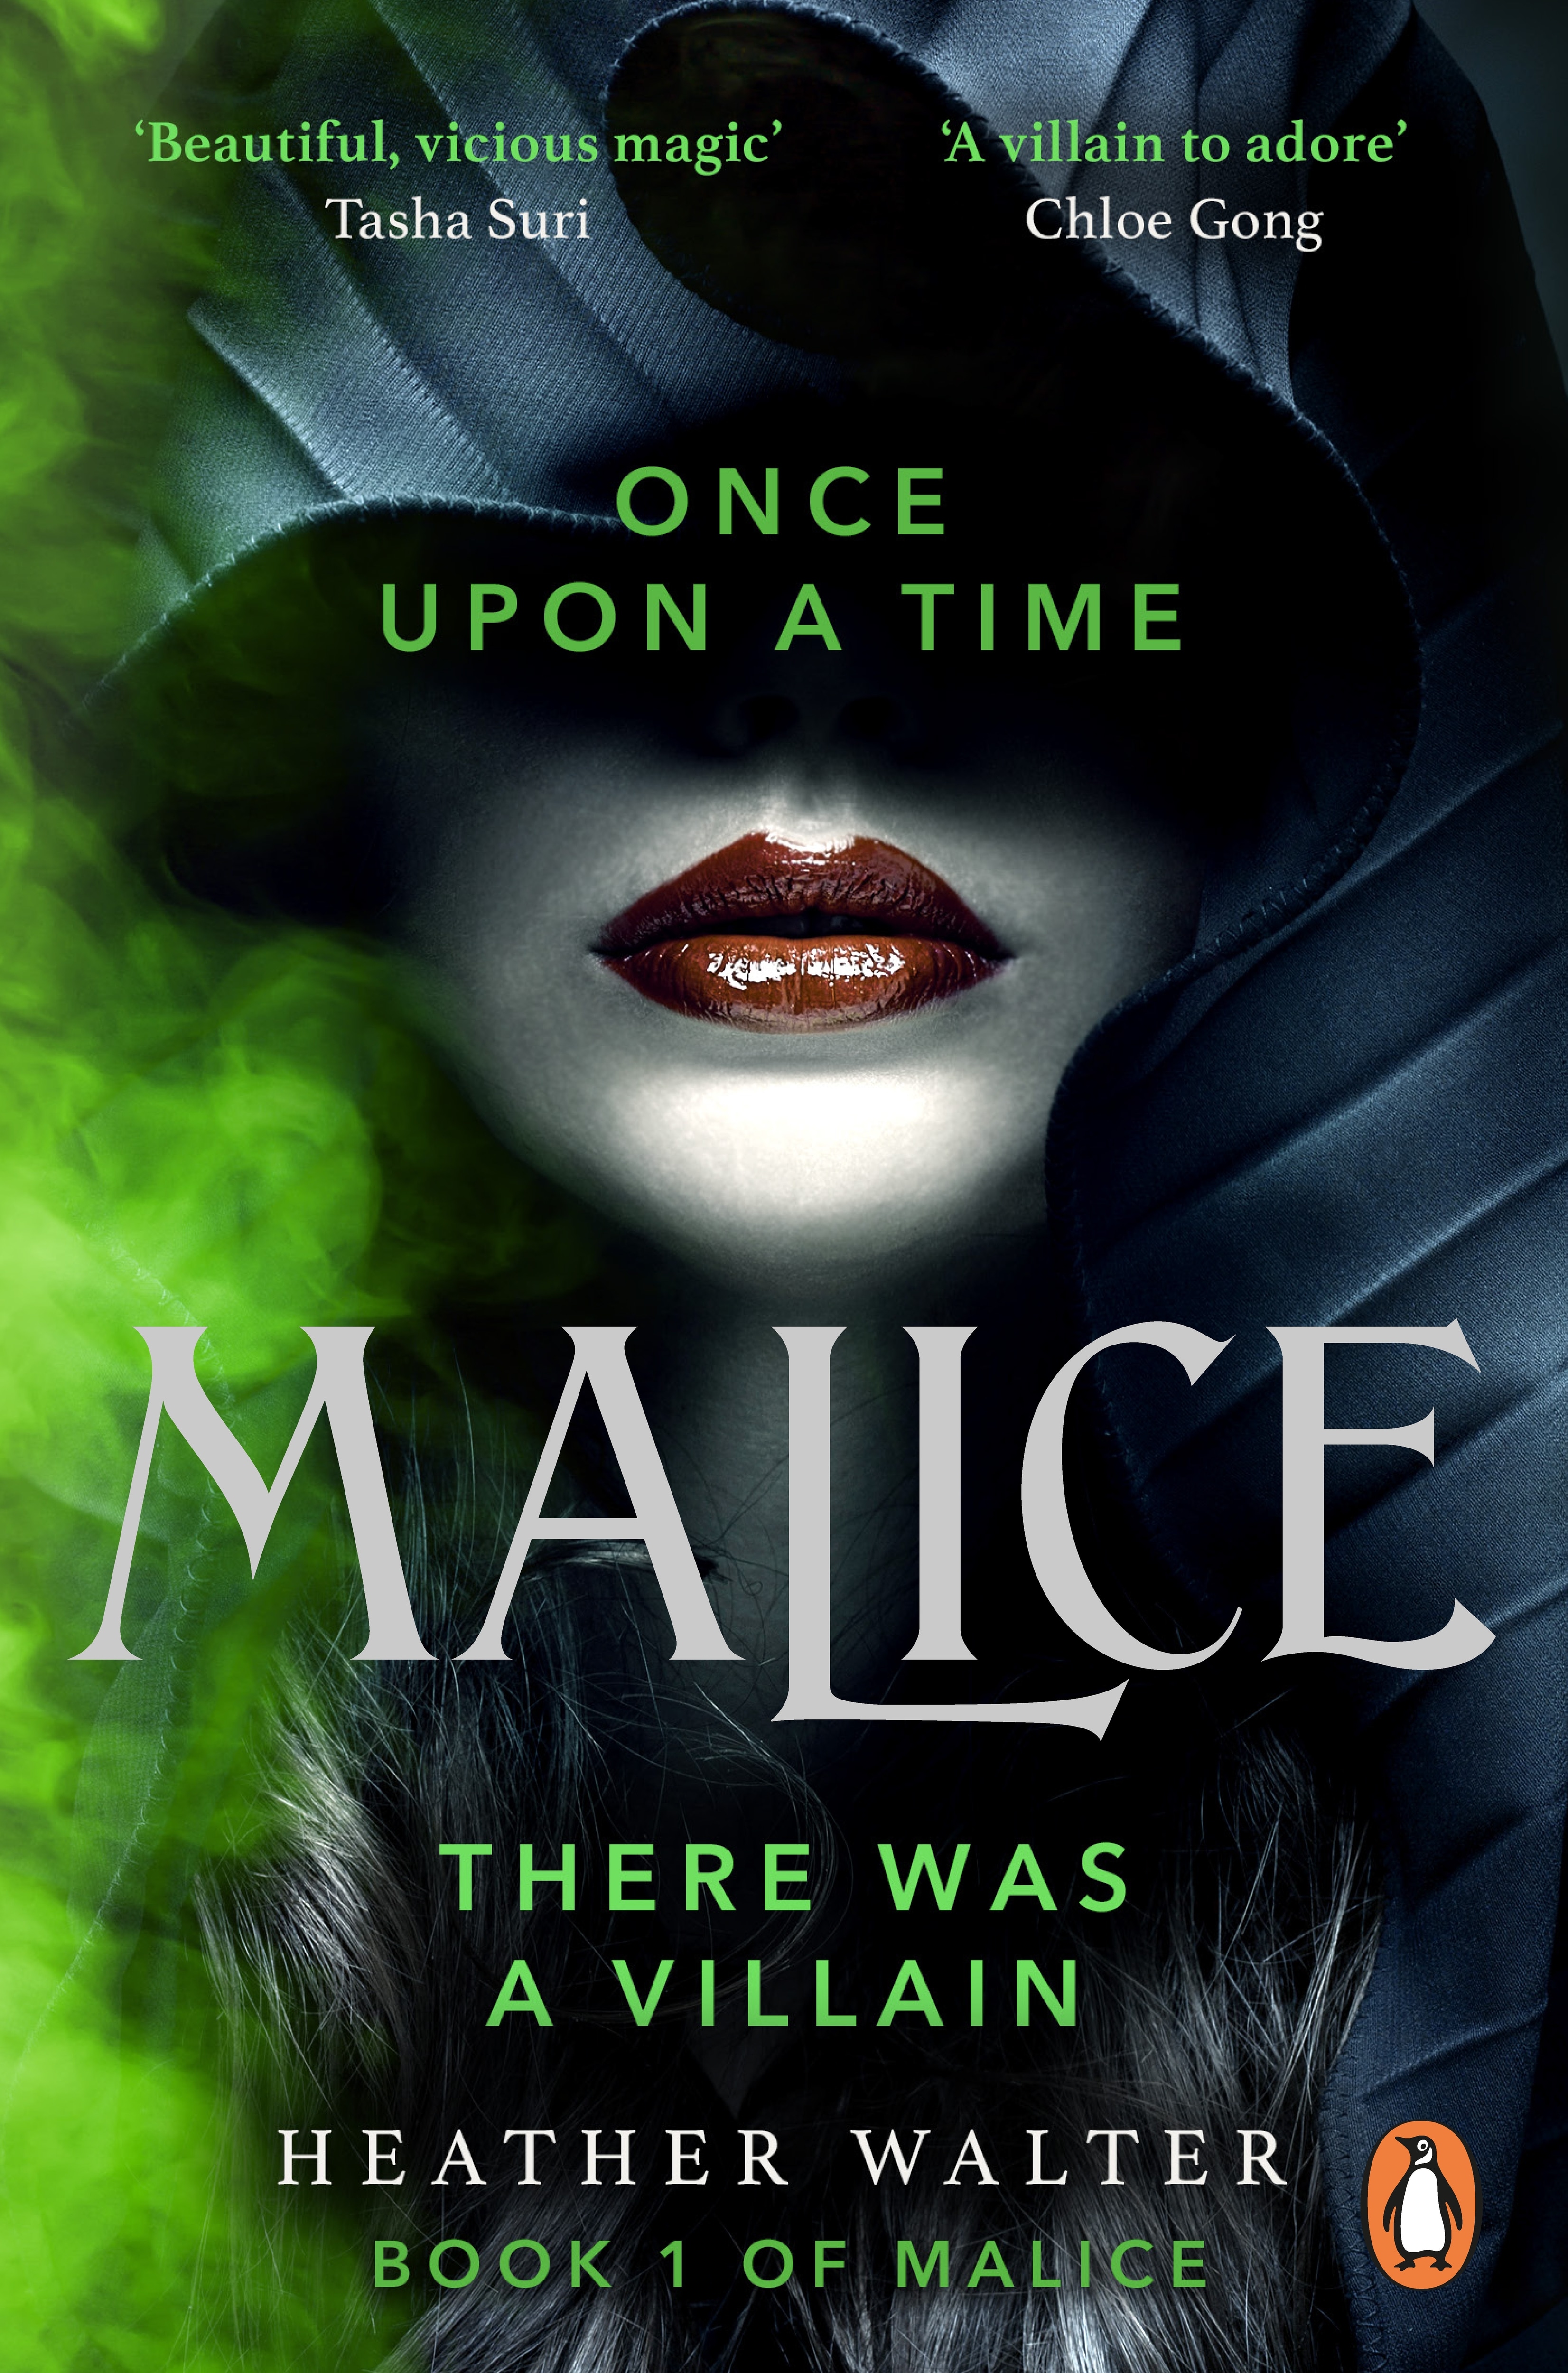 Book “Malice” by Heather Walter — January 13, 2022